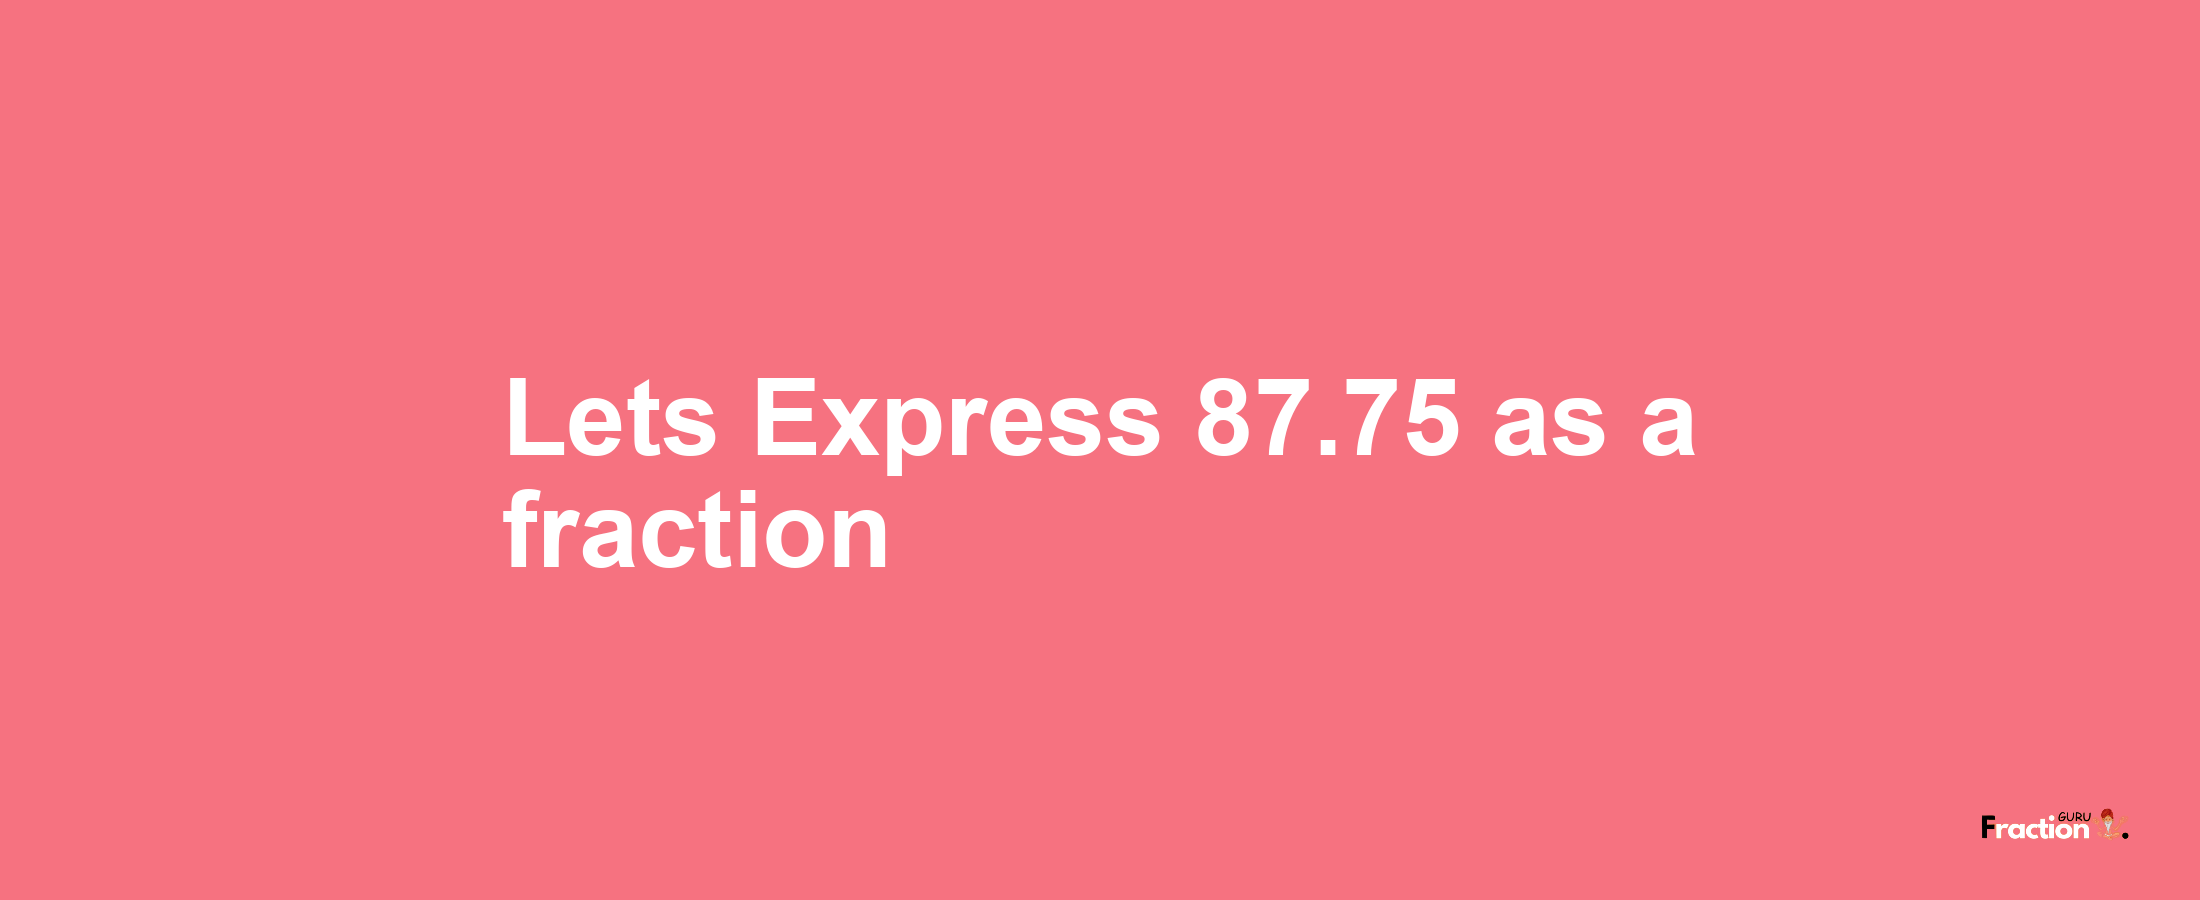 Lets Express 87.75 as afraction